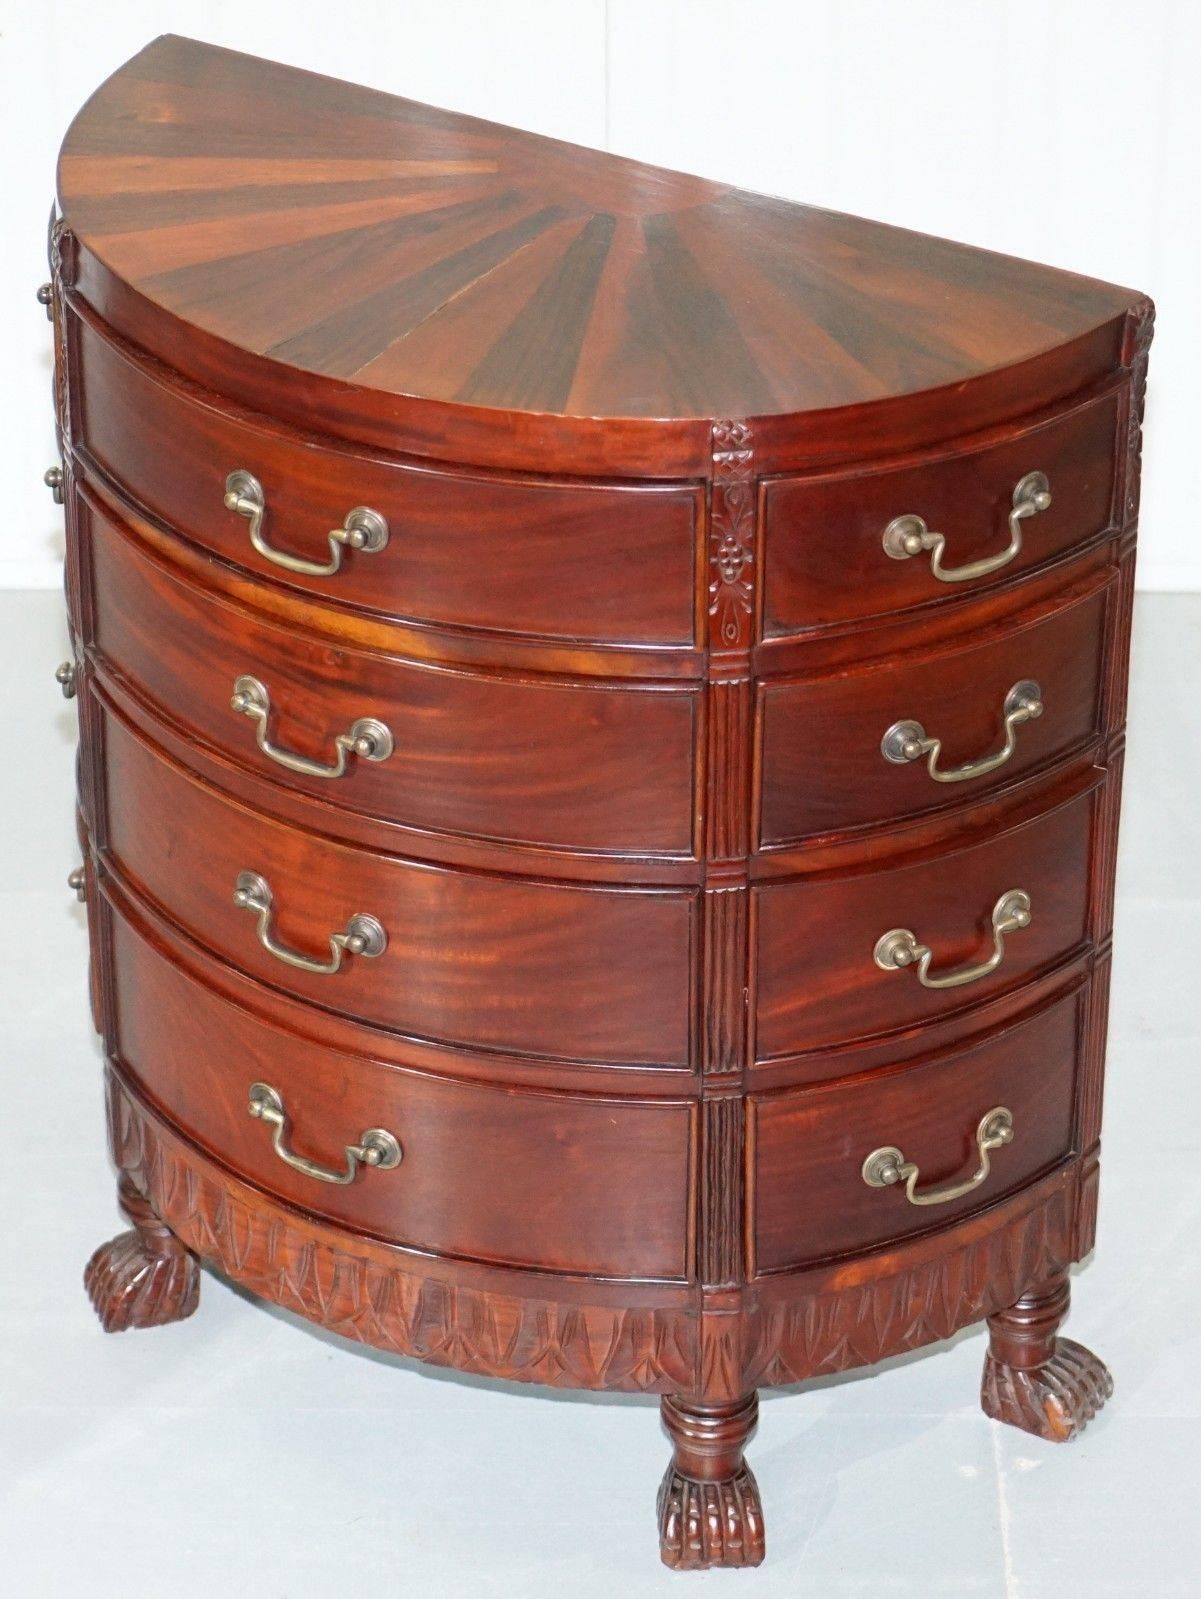 We are delighted to offer for sale this stunning solid mahogany demi line bow fronted size table sized chest of drawers

A very good looking and well-made piece, the top has different colour cuts of mahogany which give it a sunburst finish,